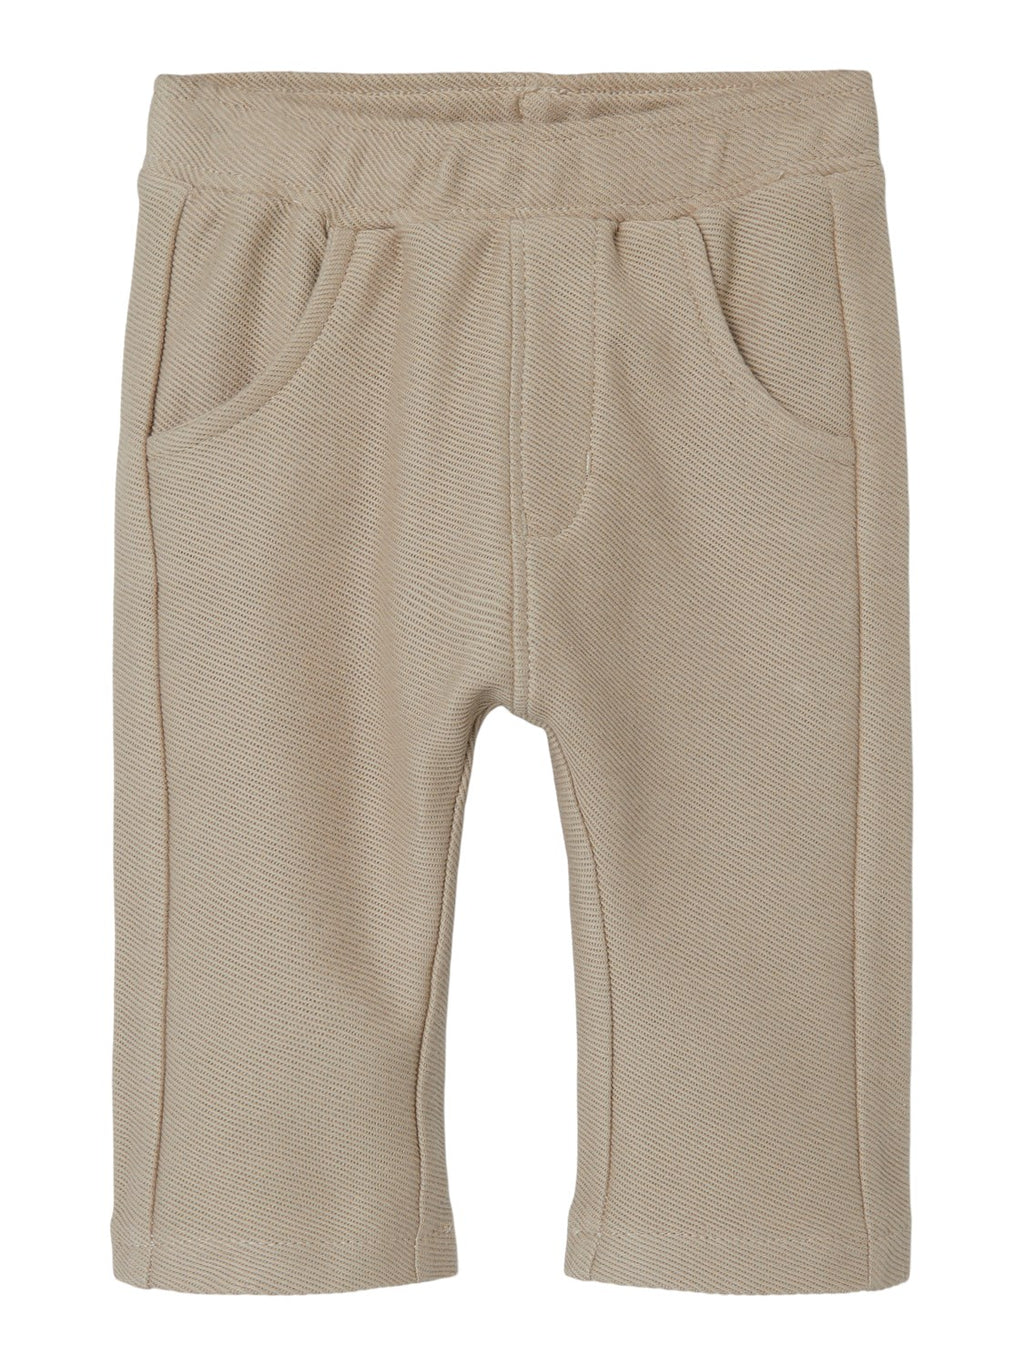 Lil Atelier Diolo Small Reg Pant Pure Cashmere